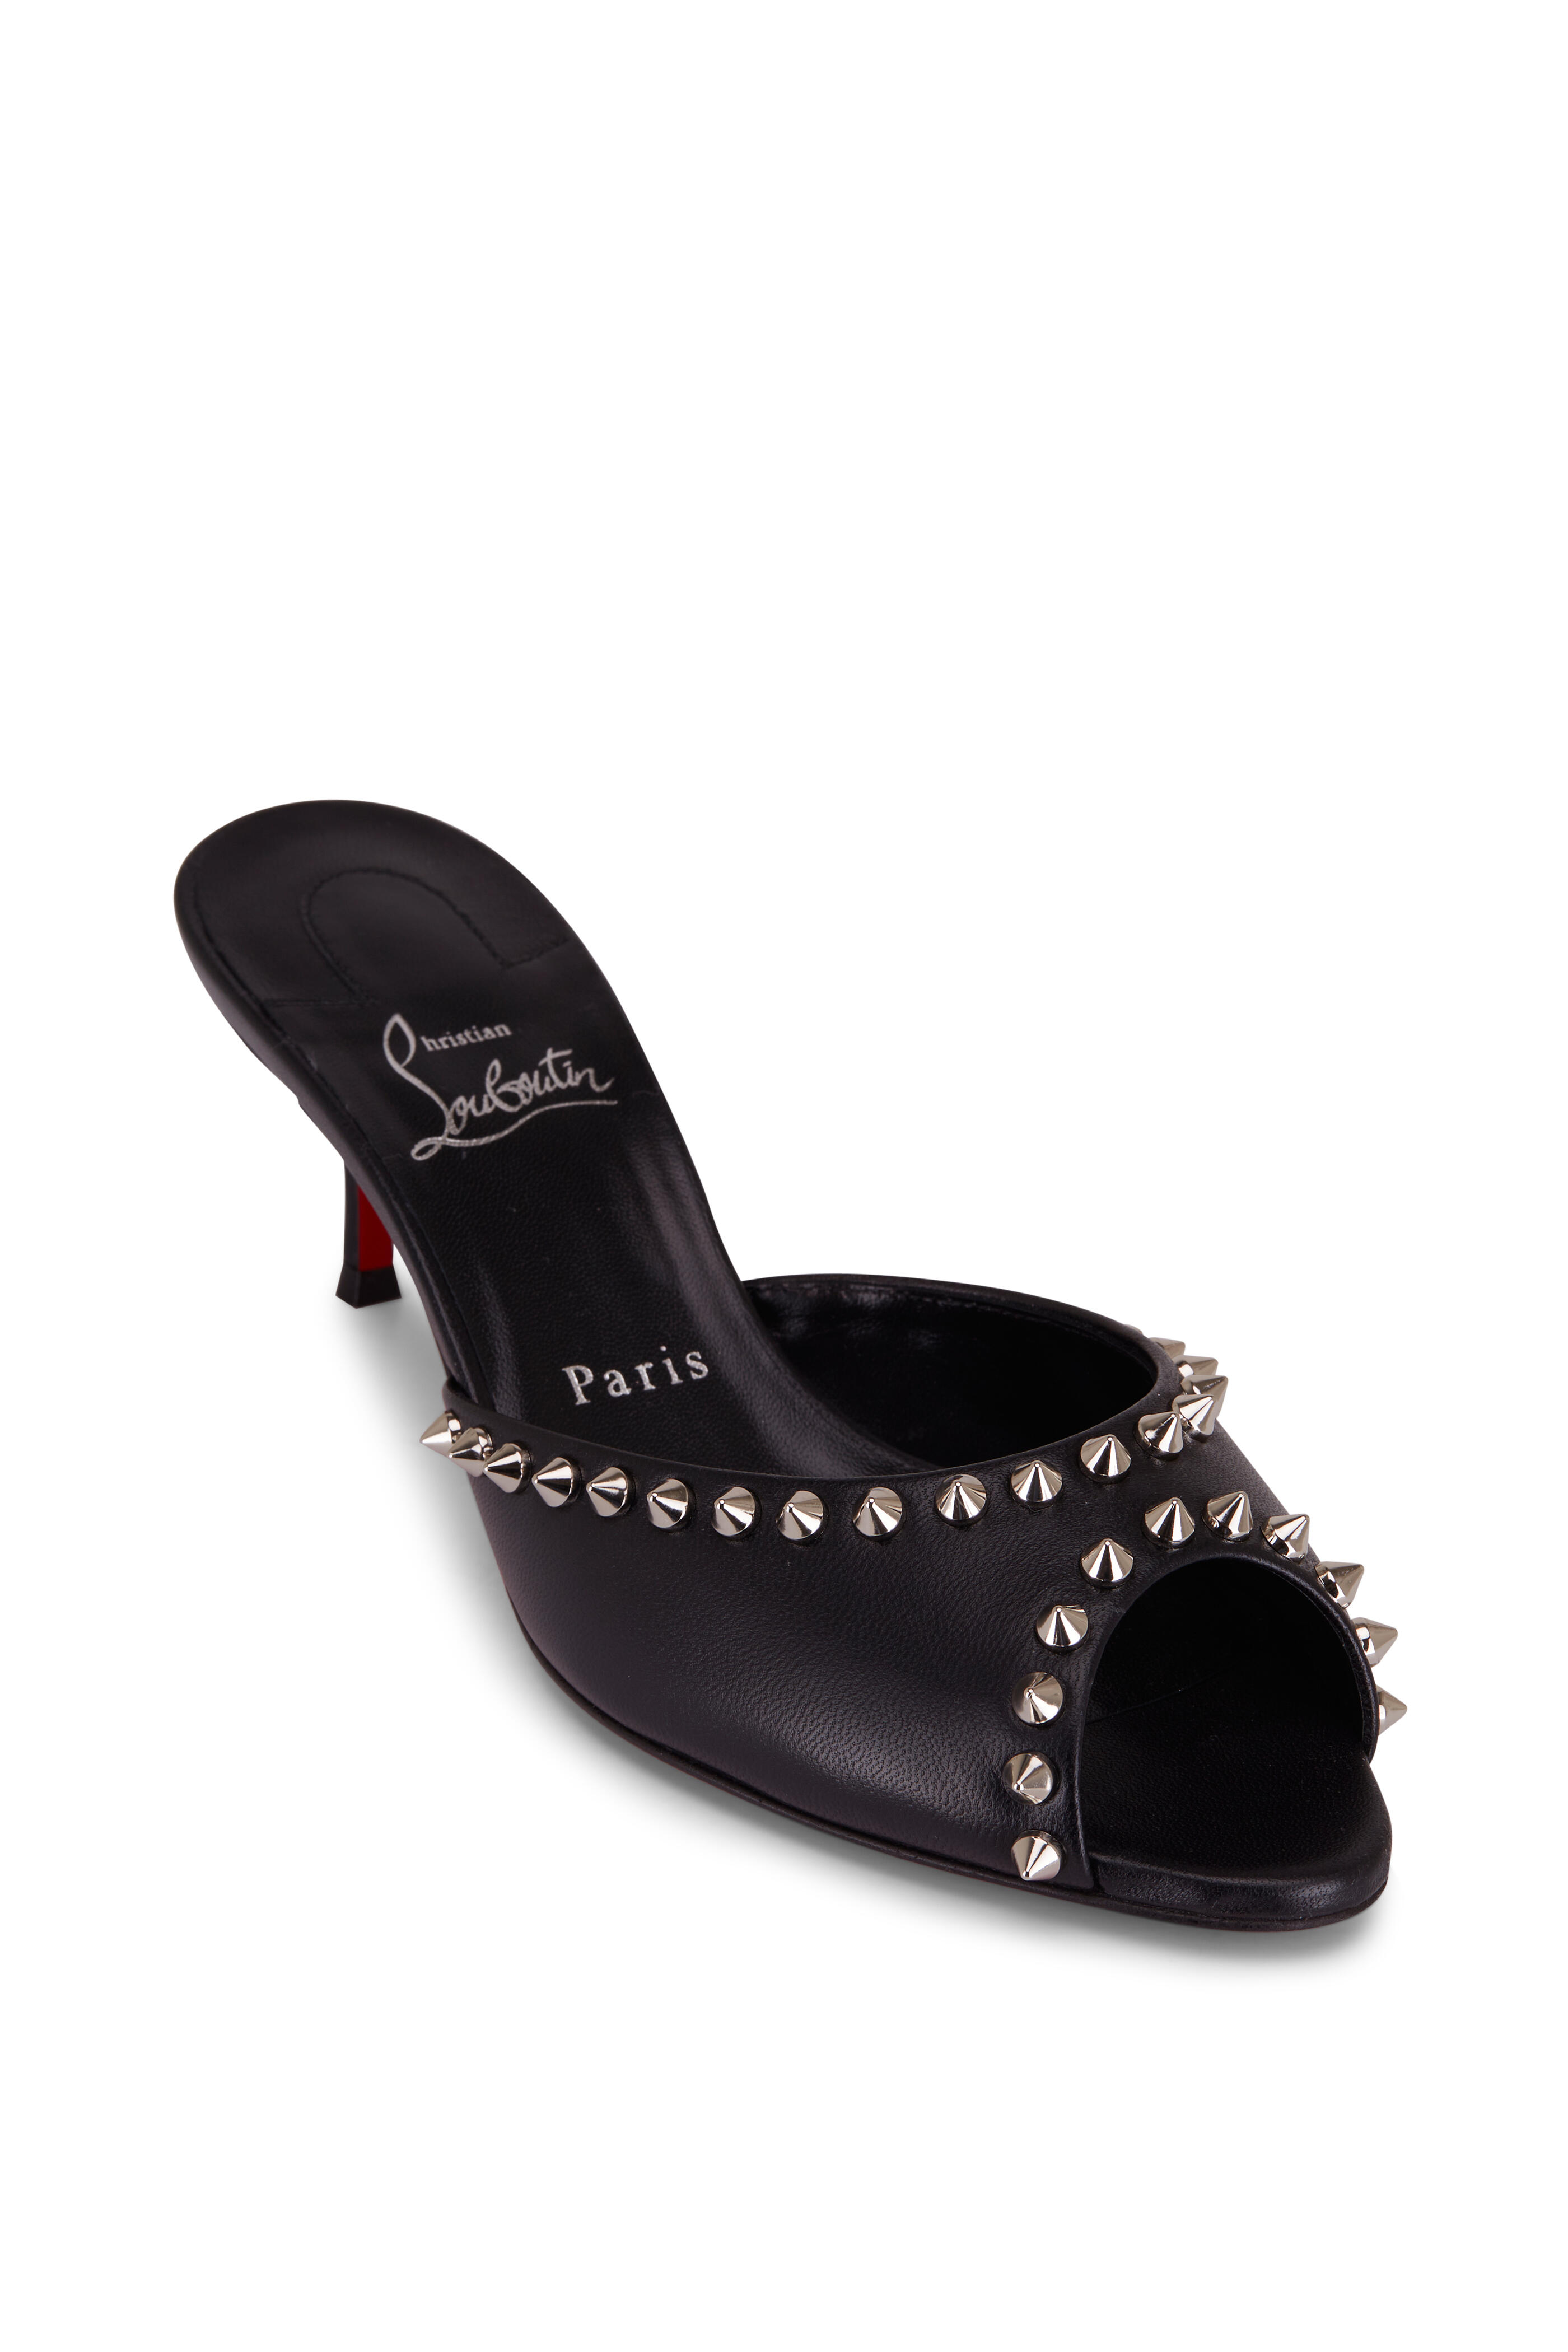 Christian Louboutin Peep Toe Boots for Women for sale